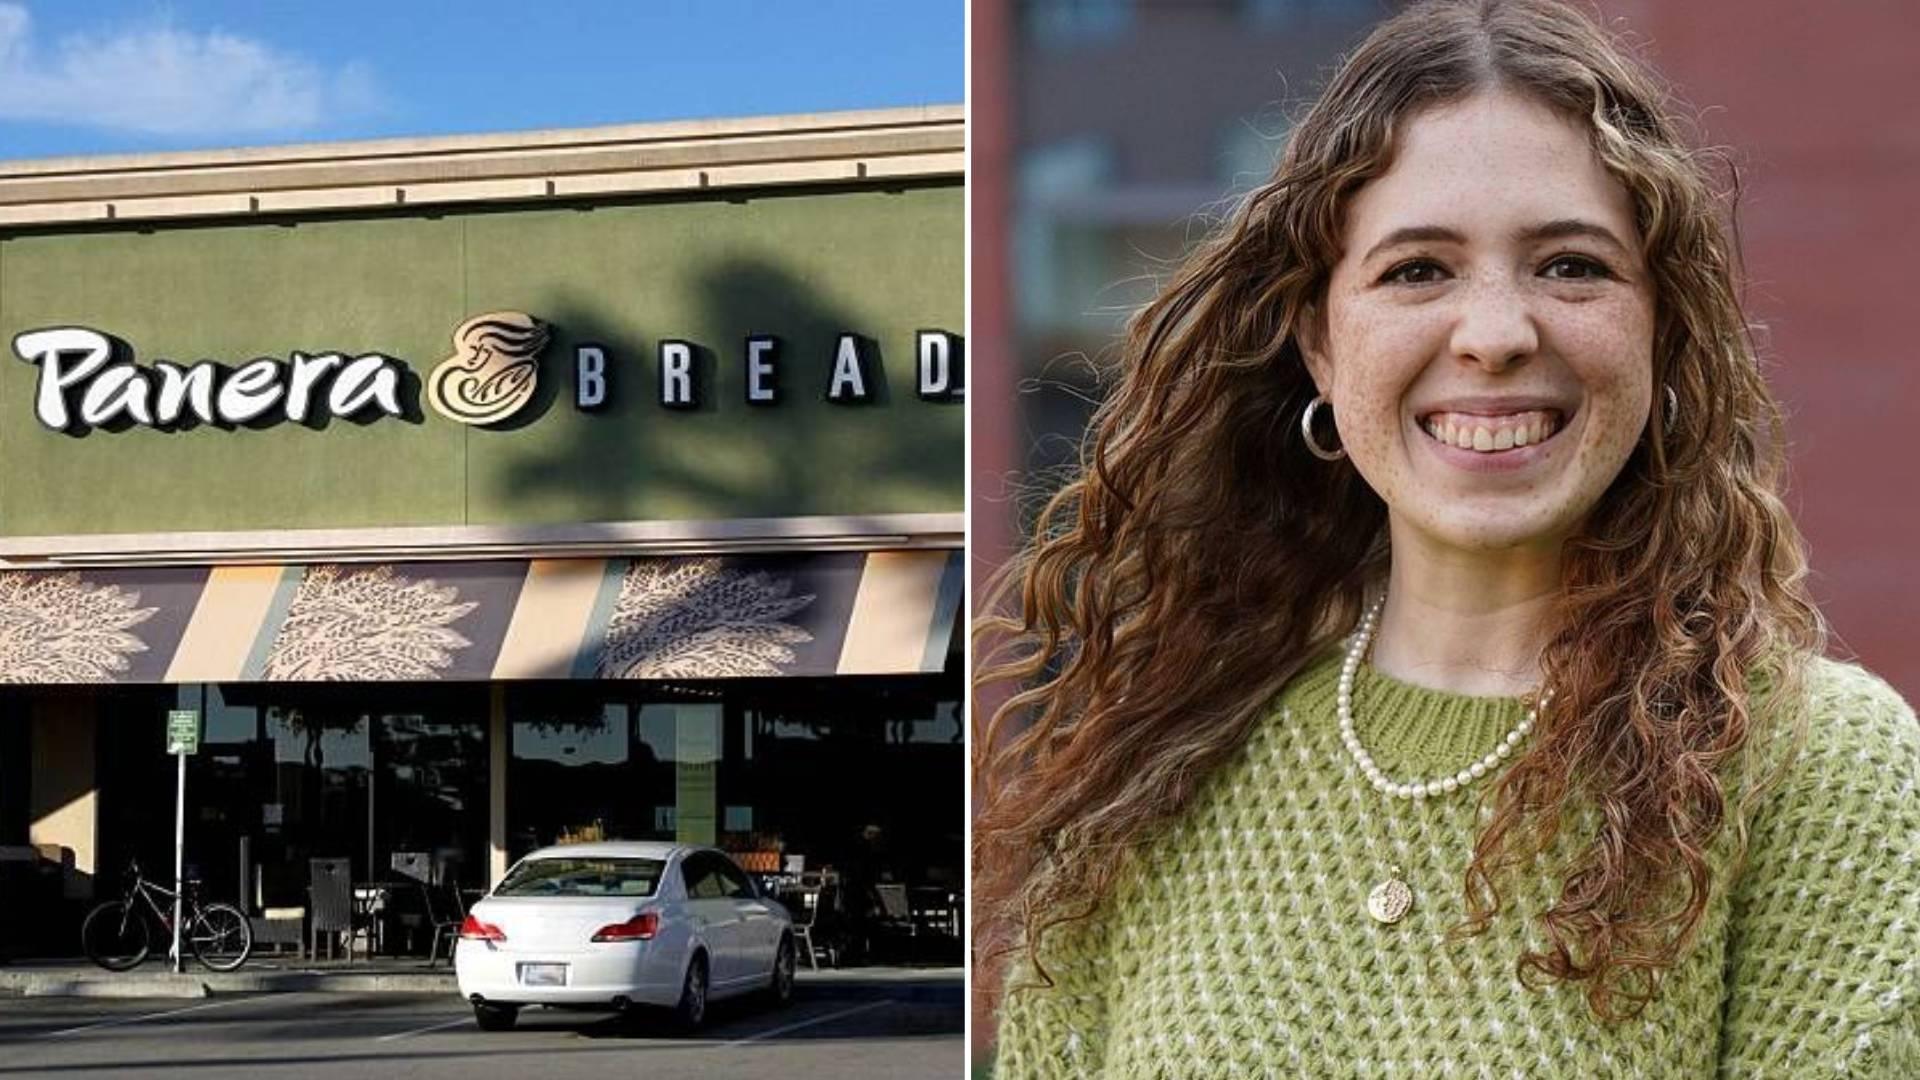 A photo of a Panera Bread outlet at left and an image of Sarah Katz at right